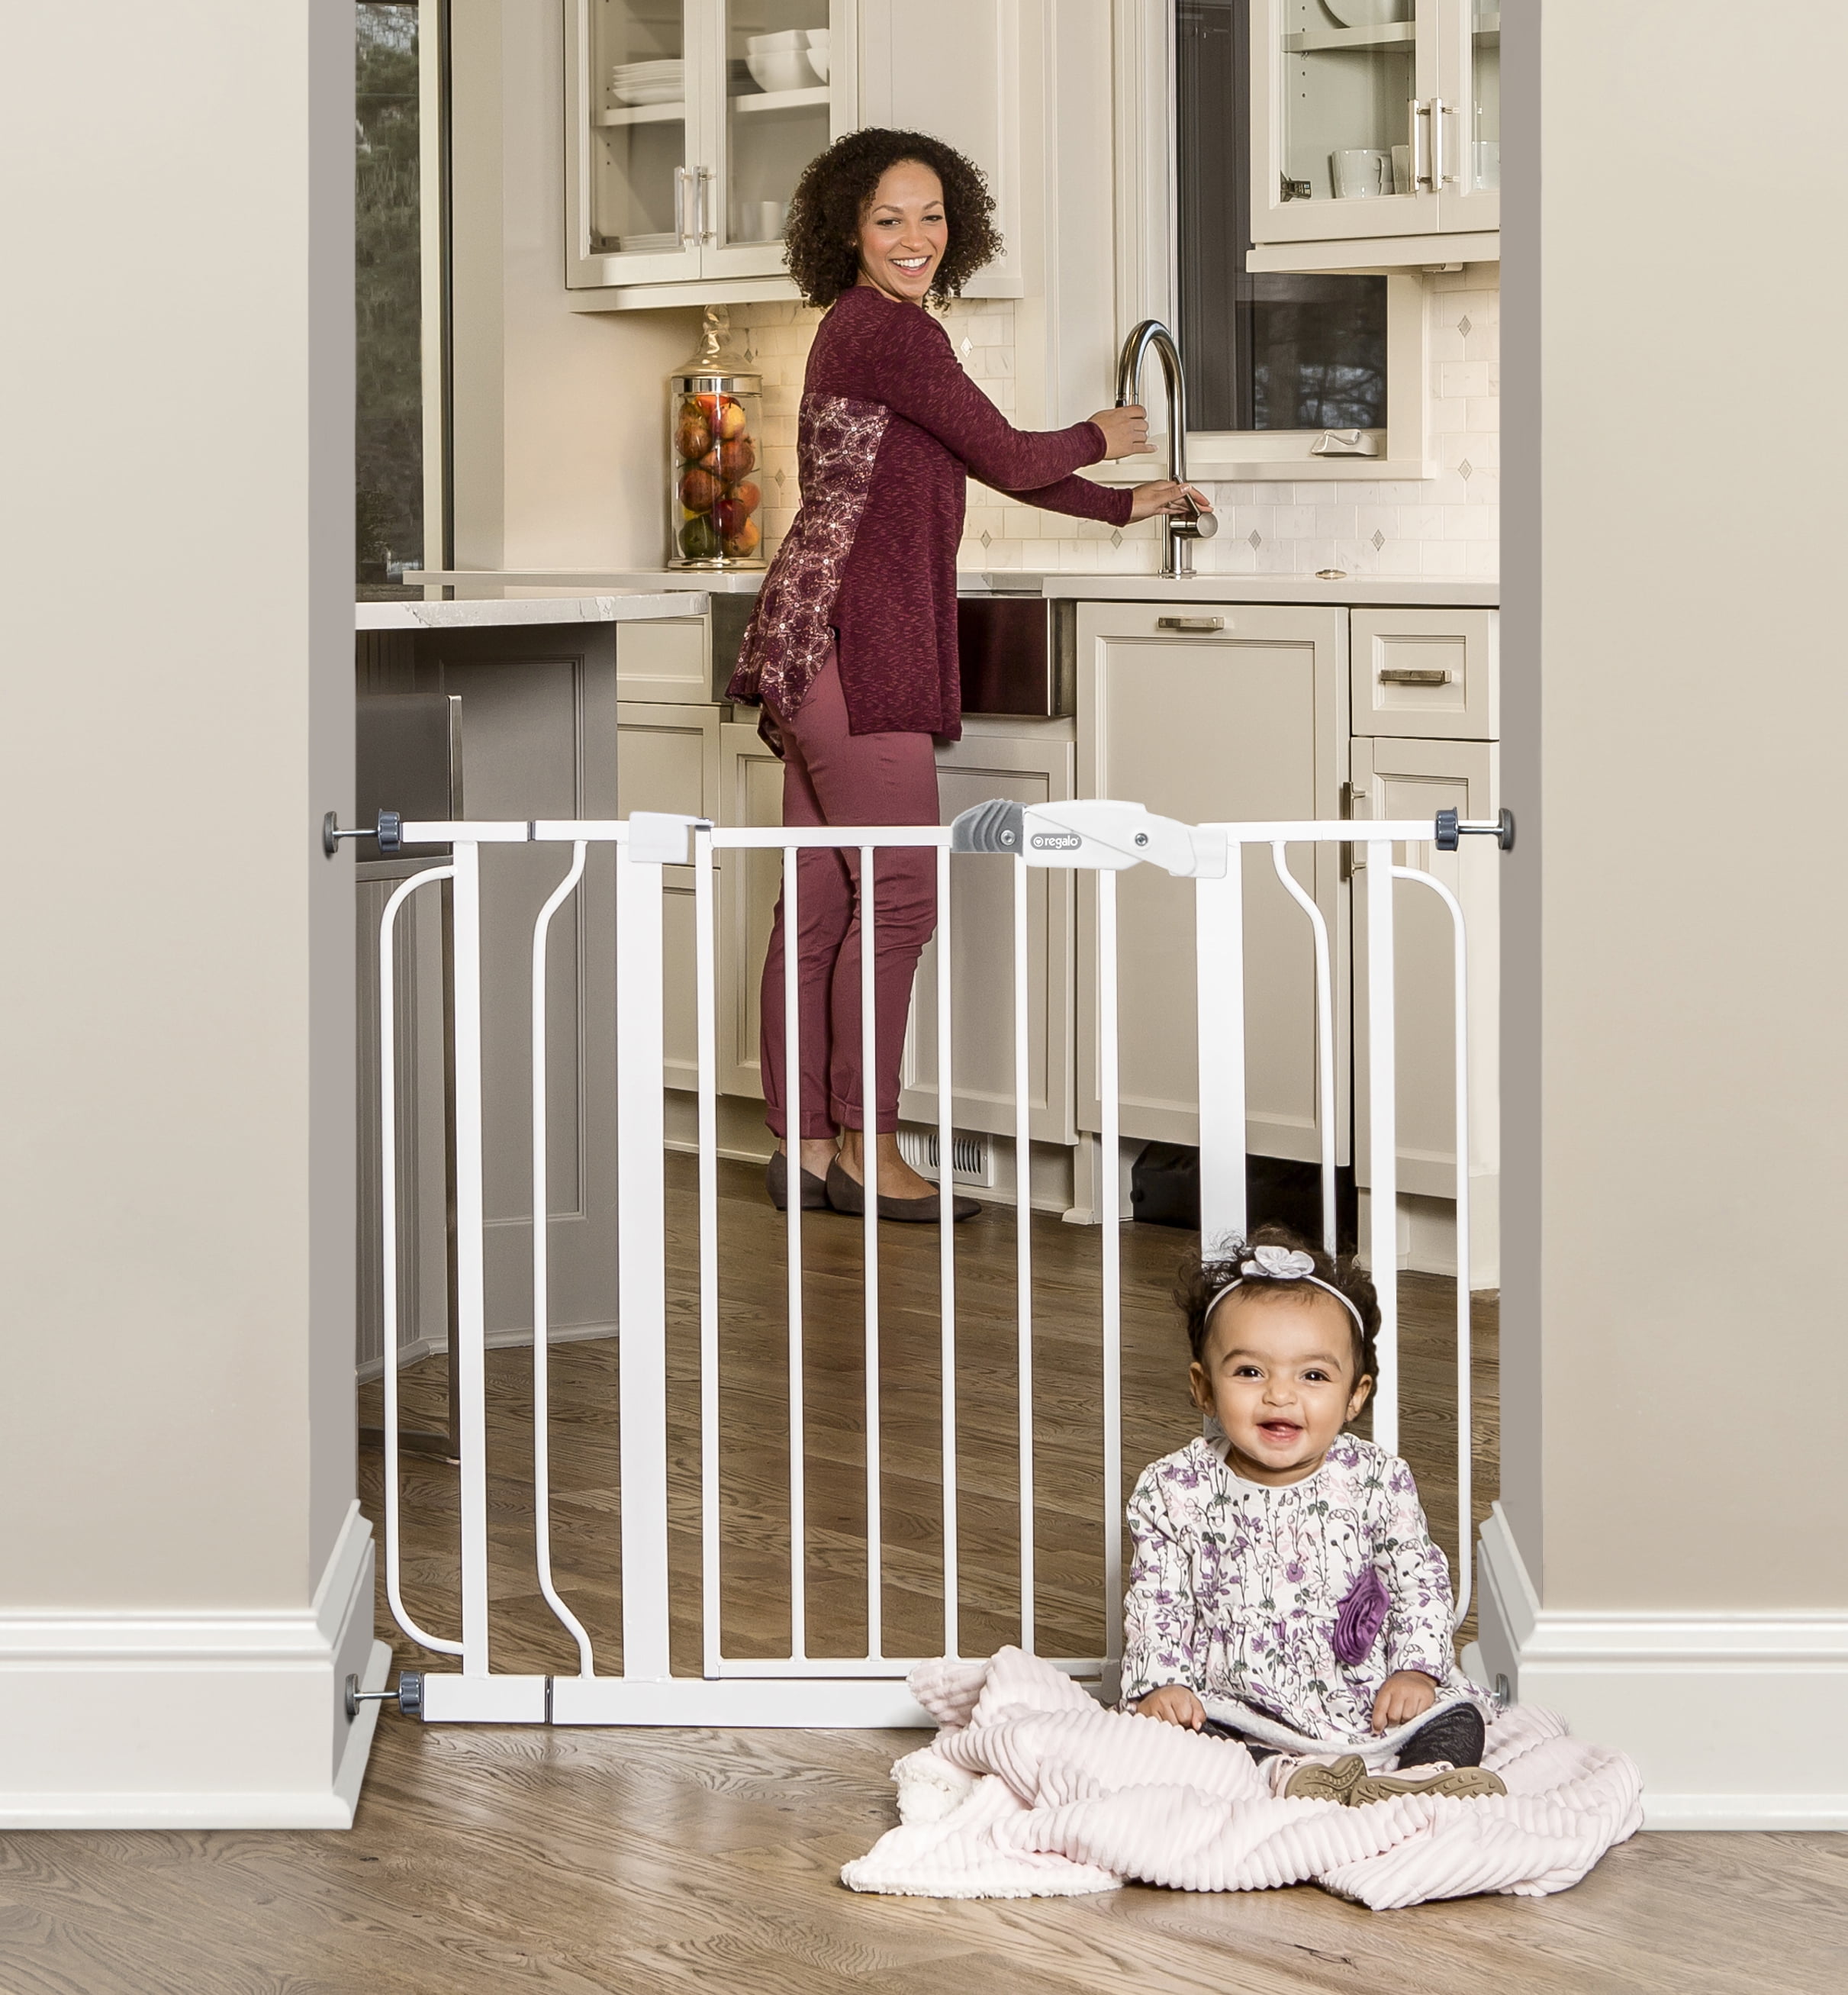 Regalo Easy Open EXTRA WIDE Pet Pets Baby Babies Child proof Metal Safety Gate 